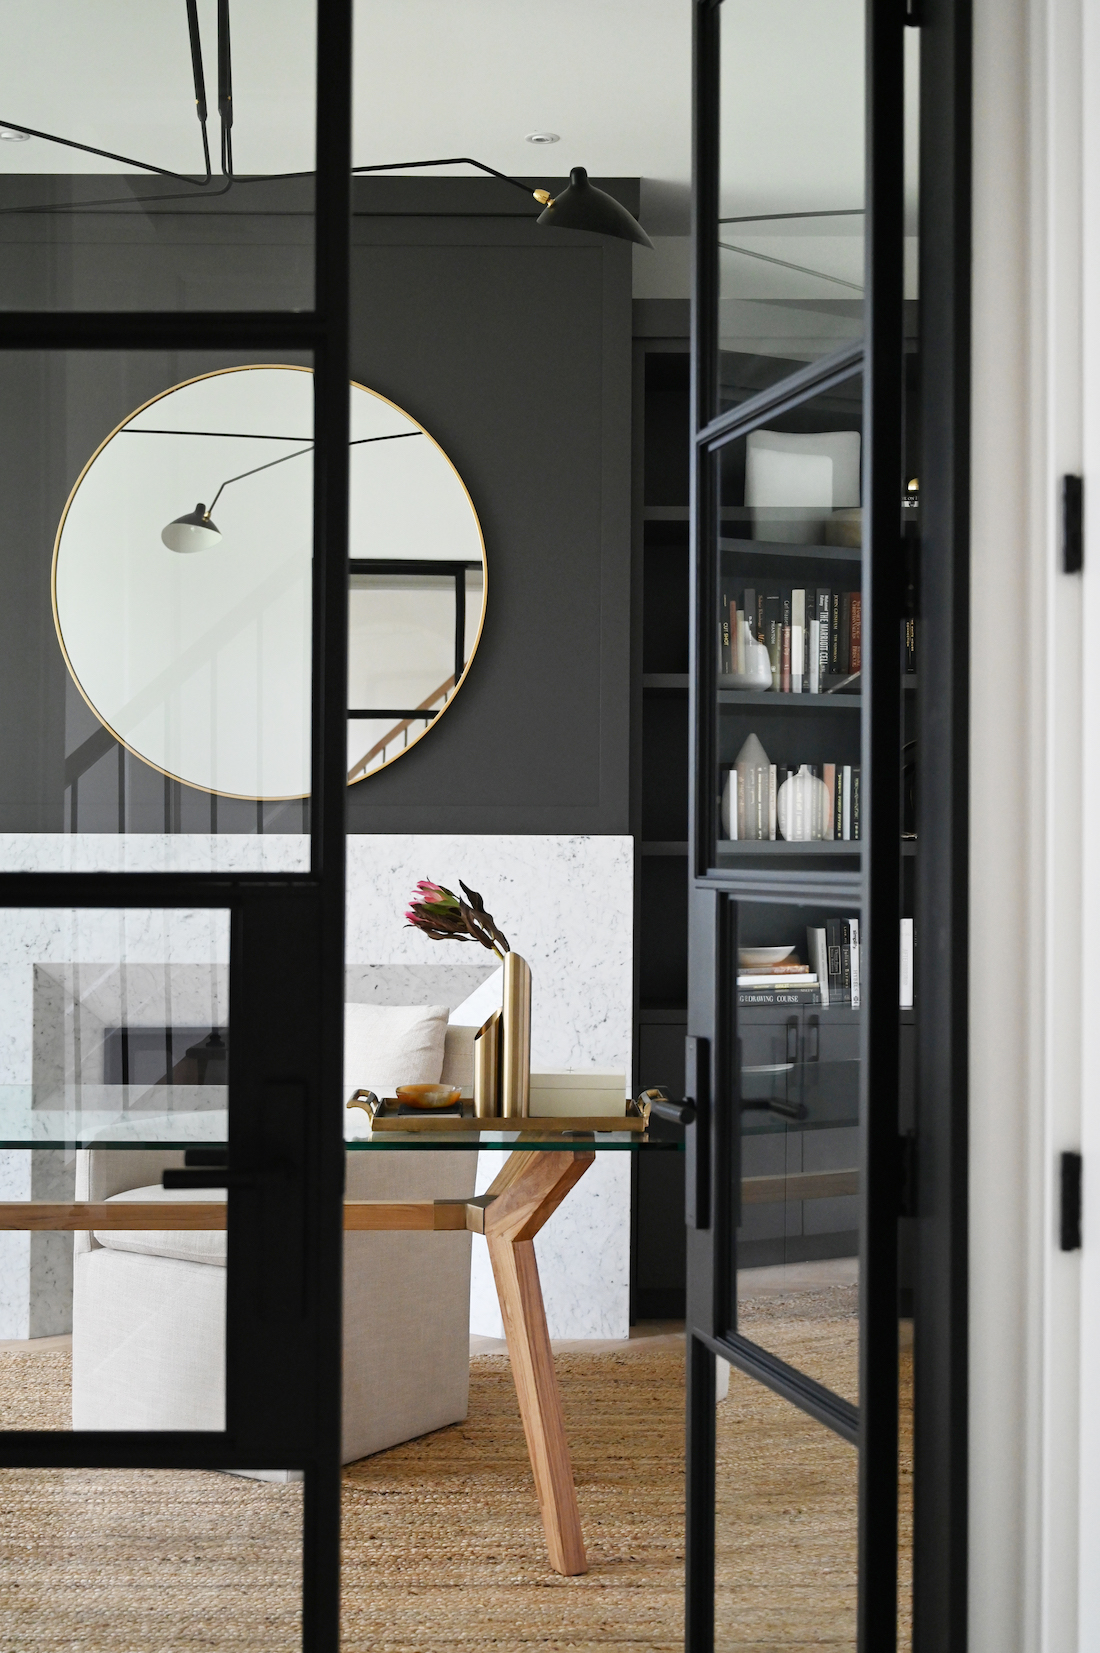 Black framed glass door into study with round mirror